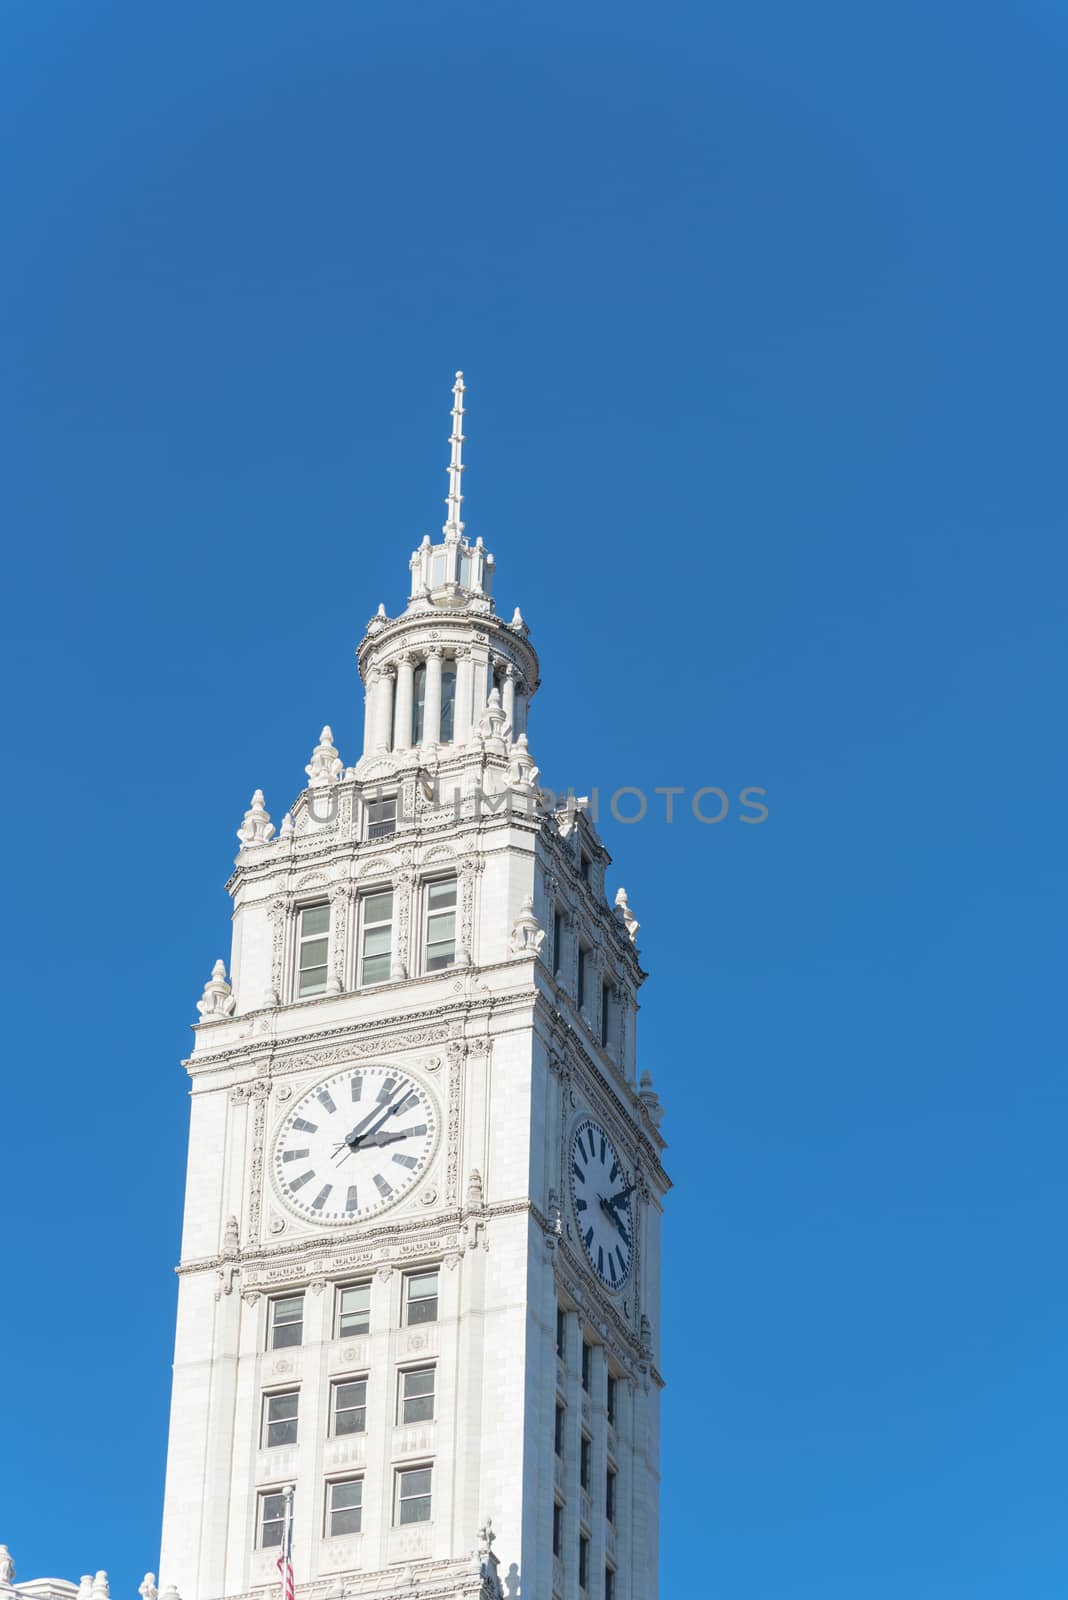 Low angle view top of traditional building with a clock faces pointing in all directions. Clock tower along Michigan Avenue in downtown Chicago, Illinois.